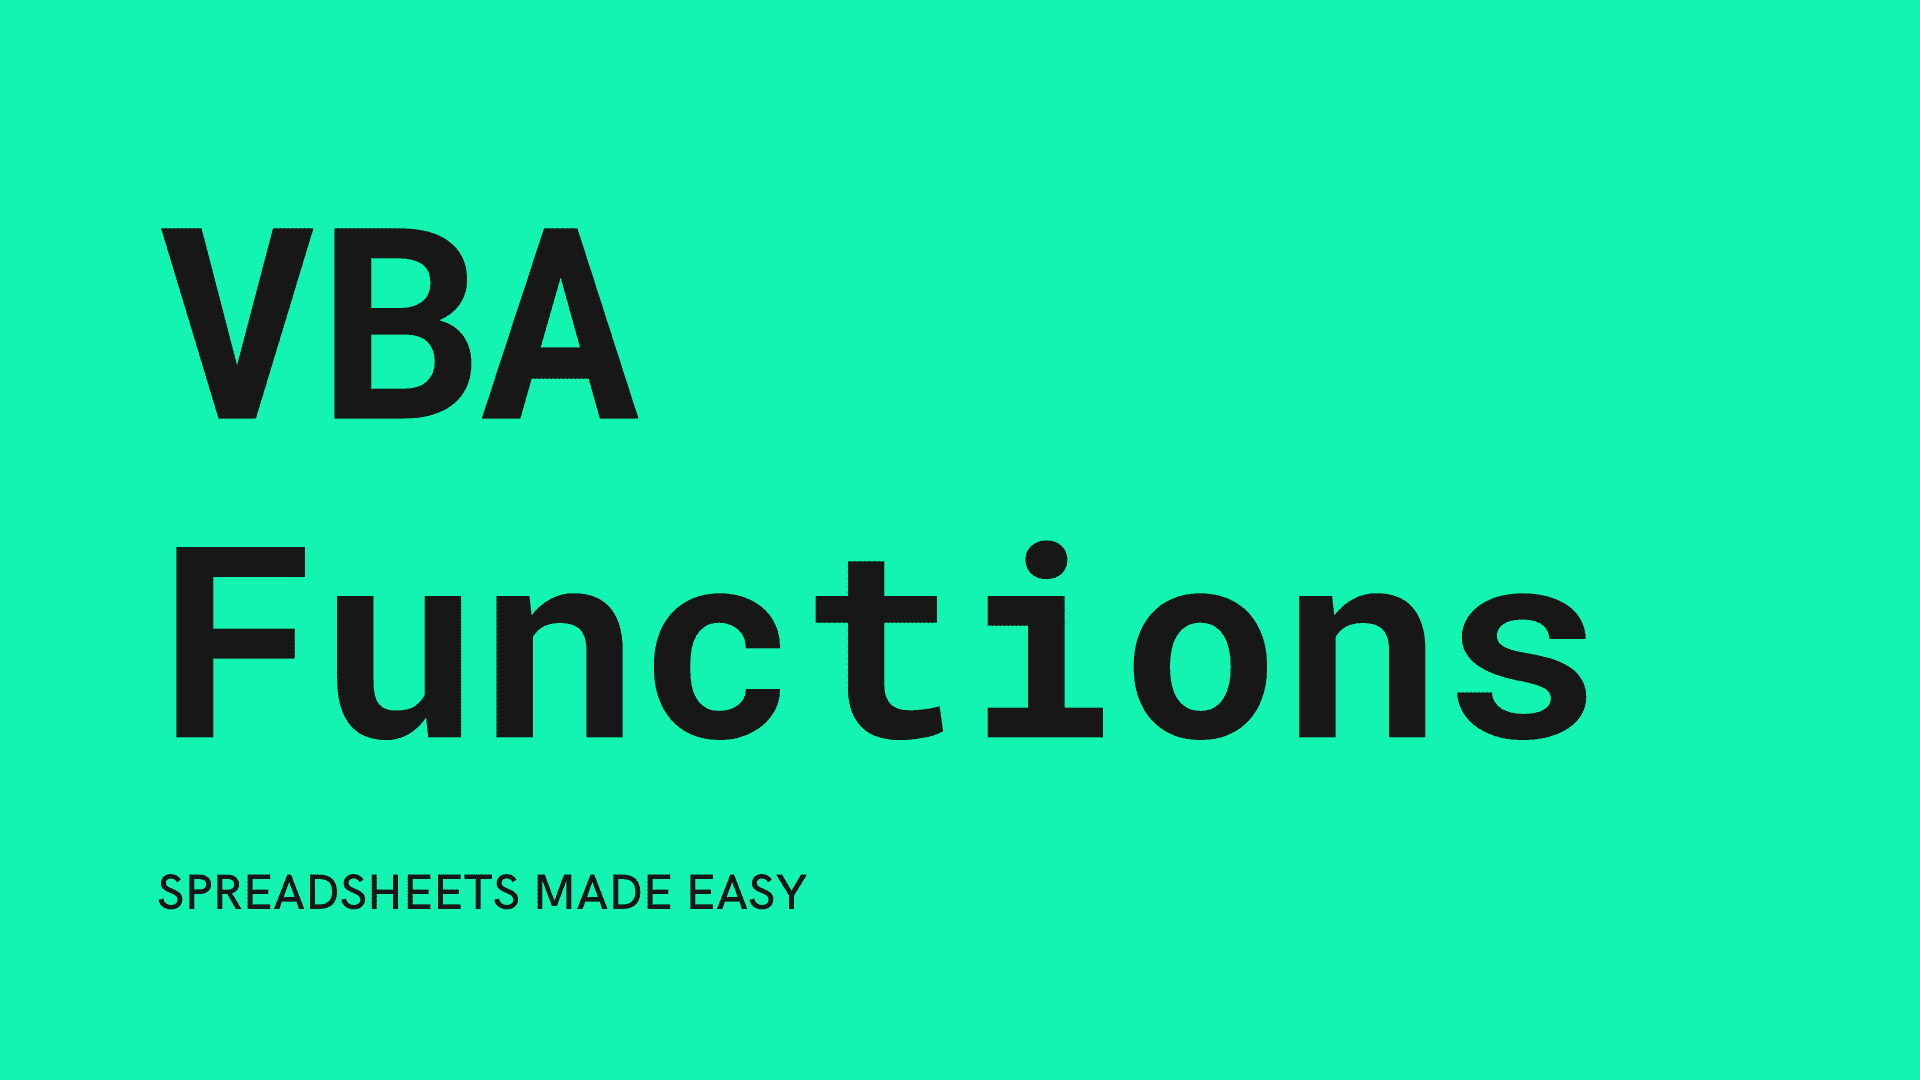 vba-functions-spreadsheets-made-easy